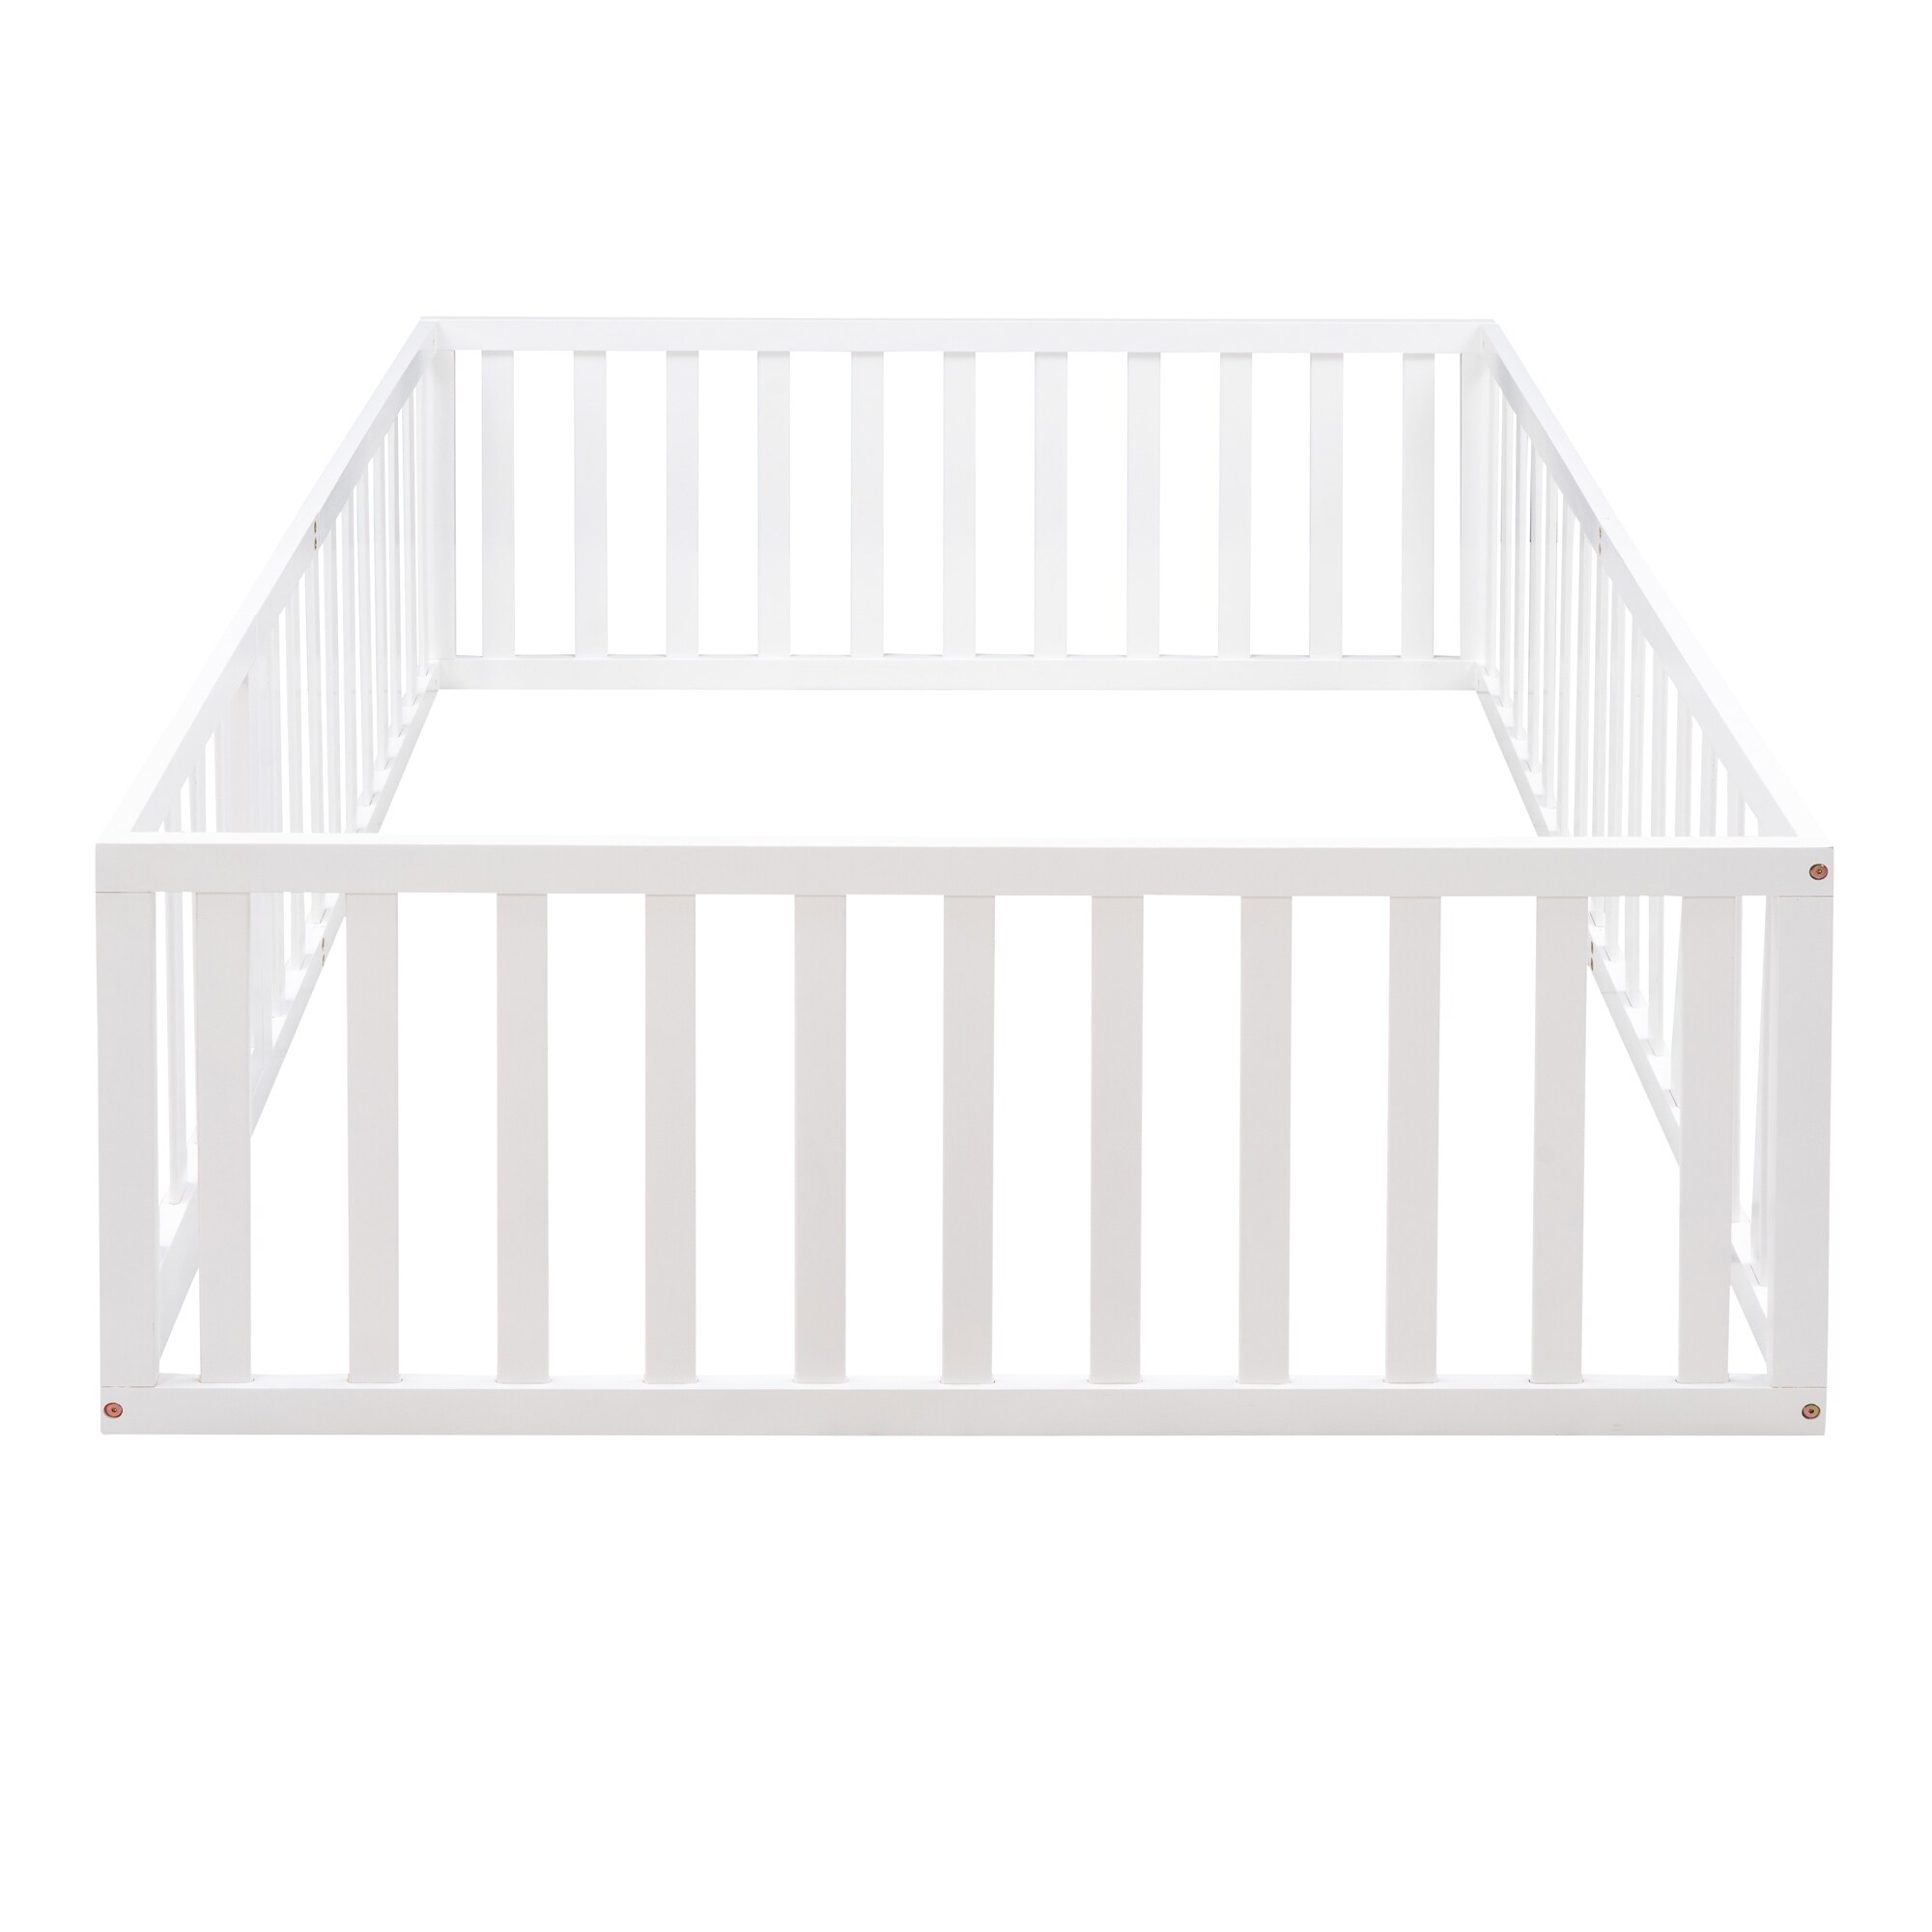 56" x 77" Full Size Solid Wood Floor Bed Frame with Fence and Door, Not Including Slats, for Toddler & Kids & Babys